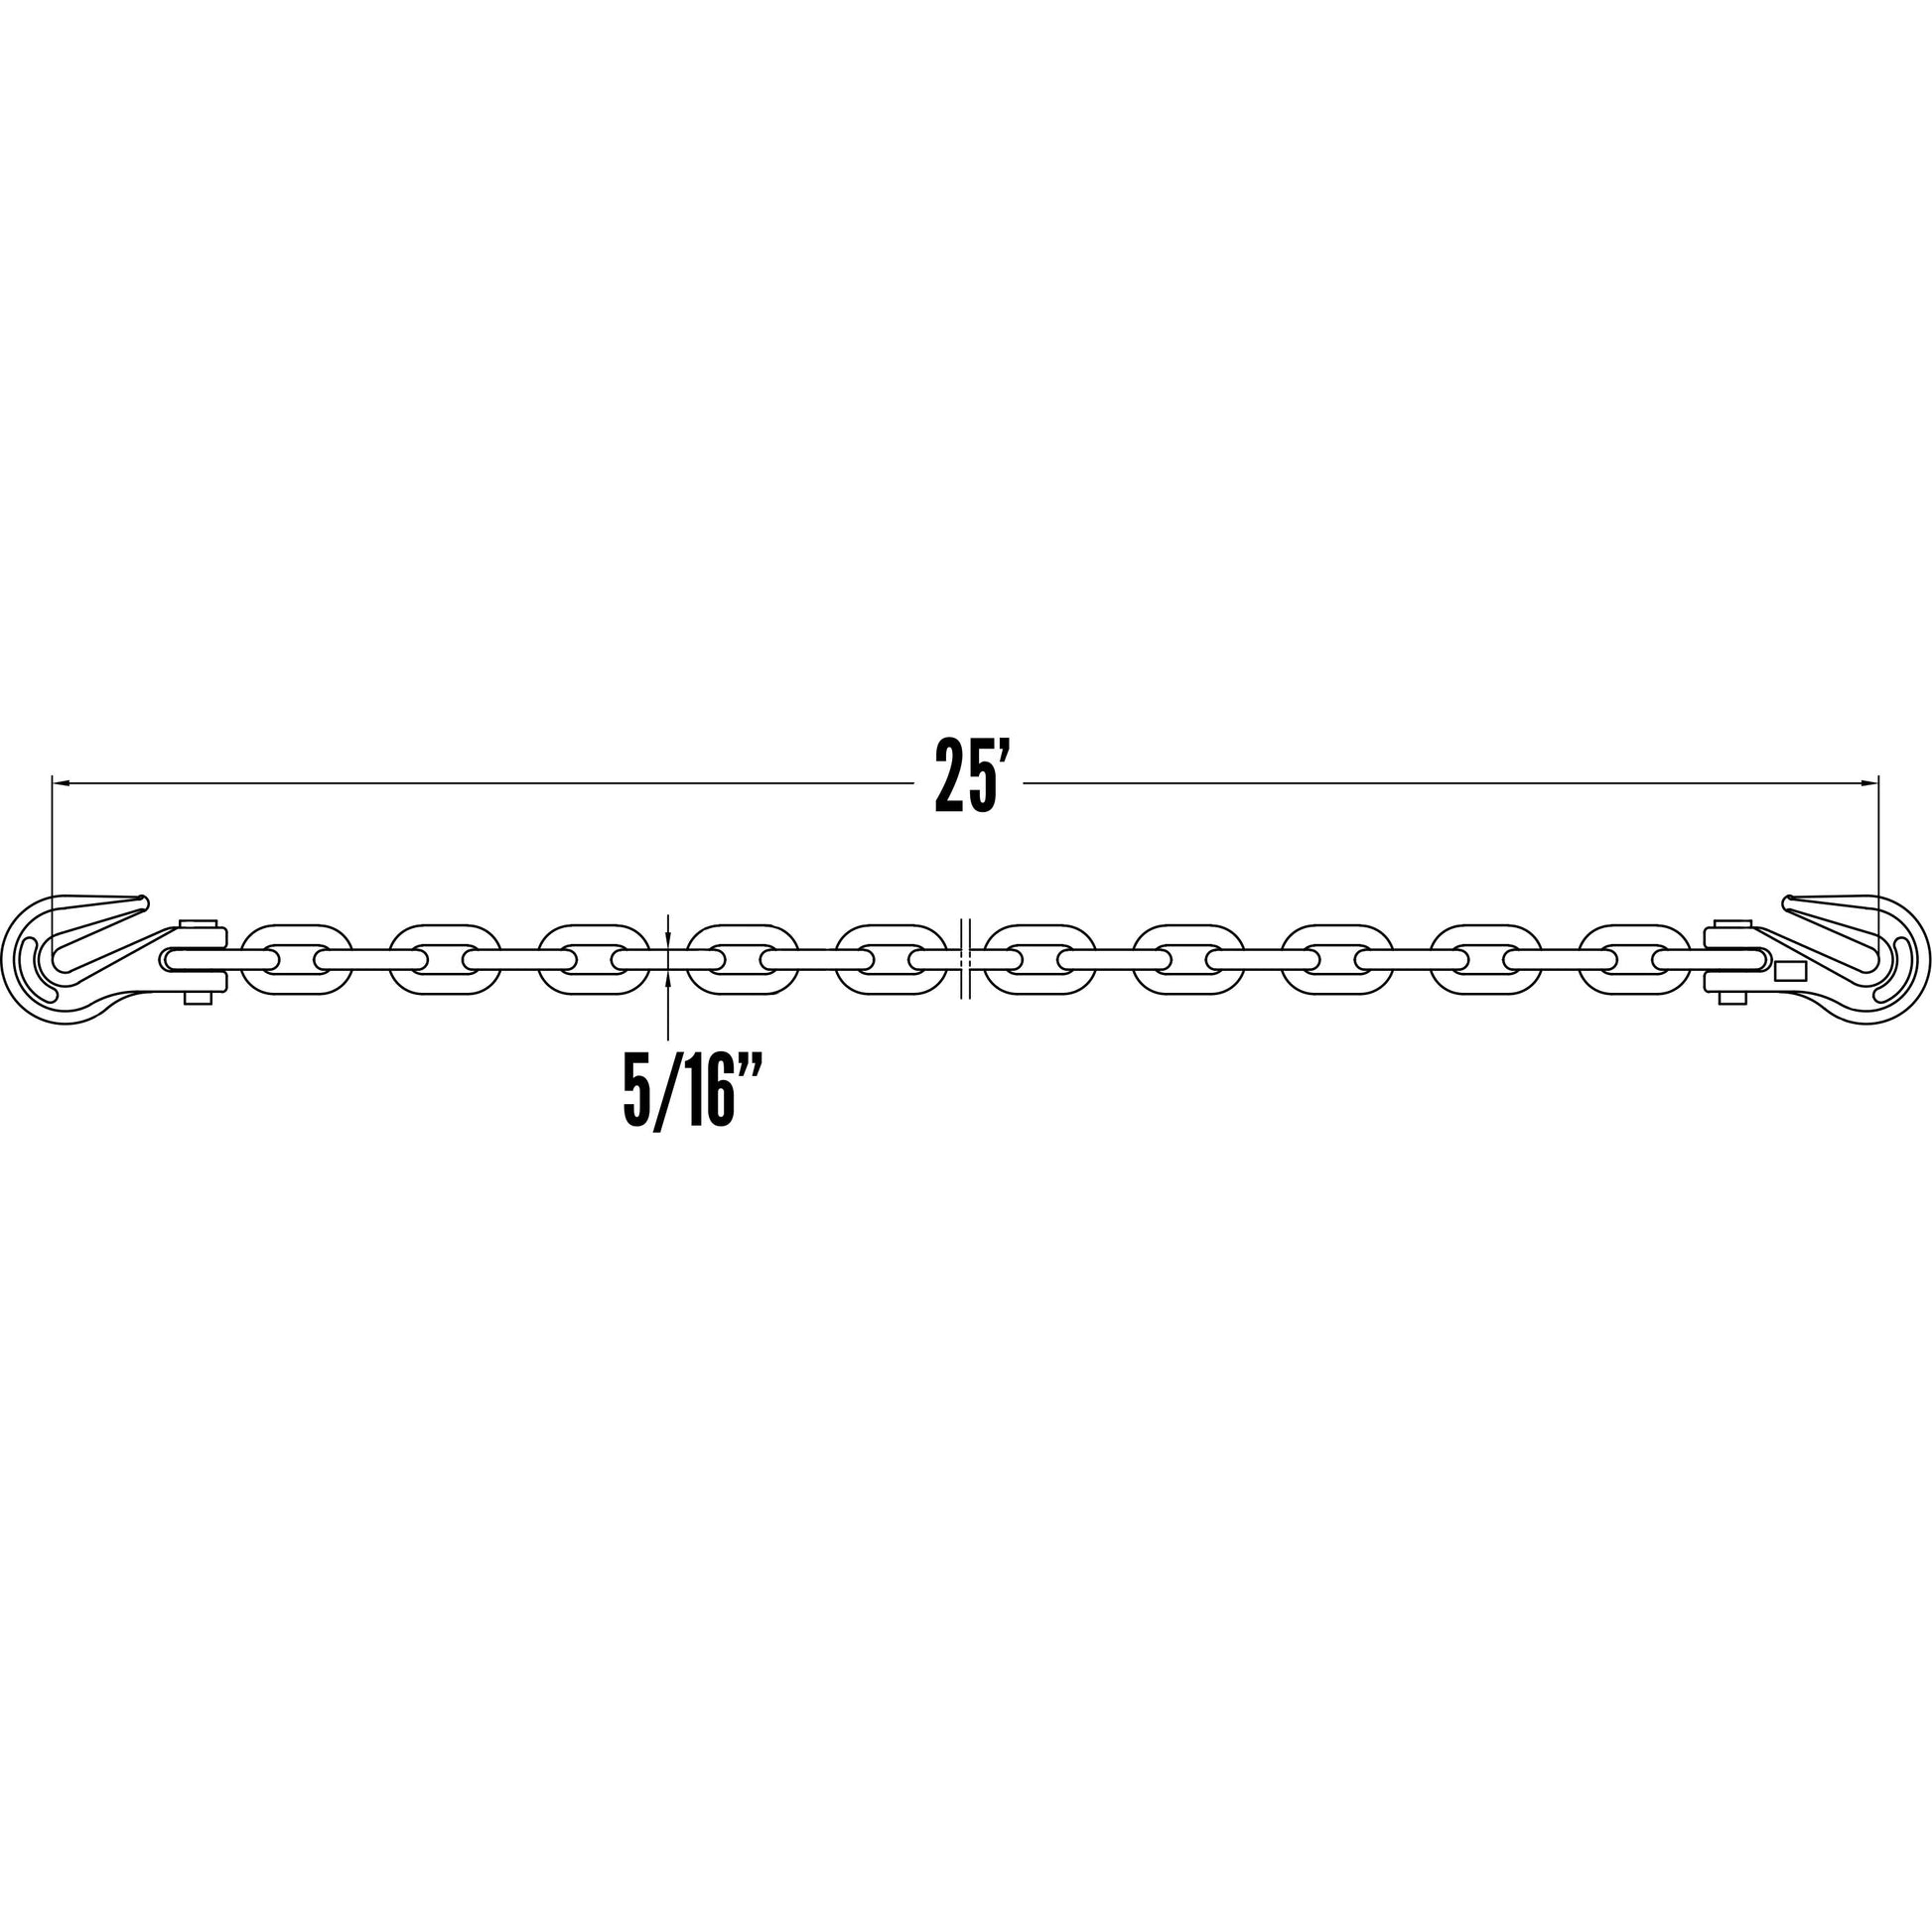 Transport Chain Grade 70 516 inch x 25 foot Made in USA image 4 of 7